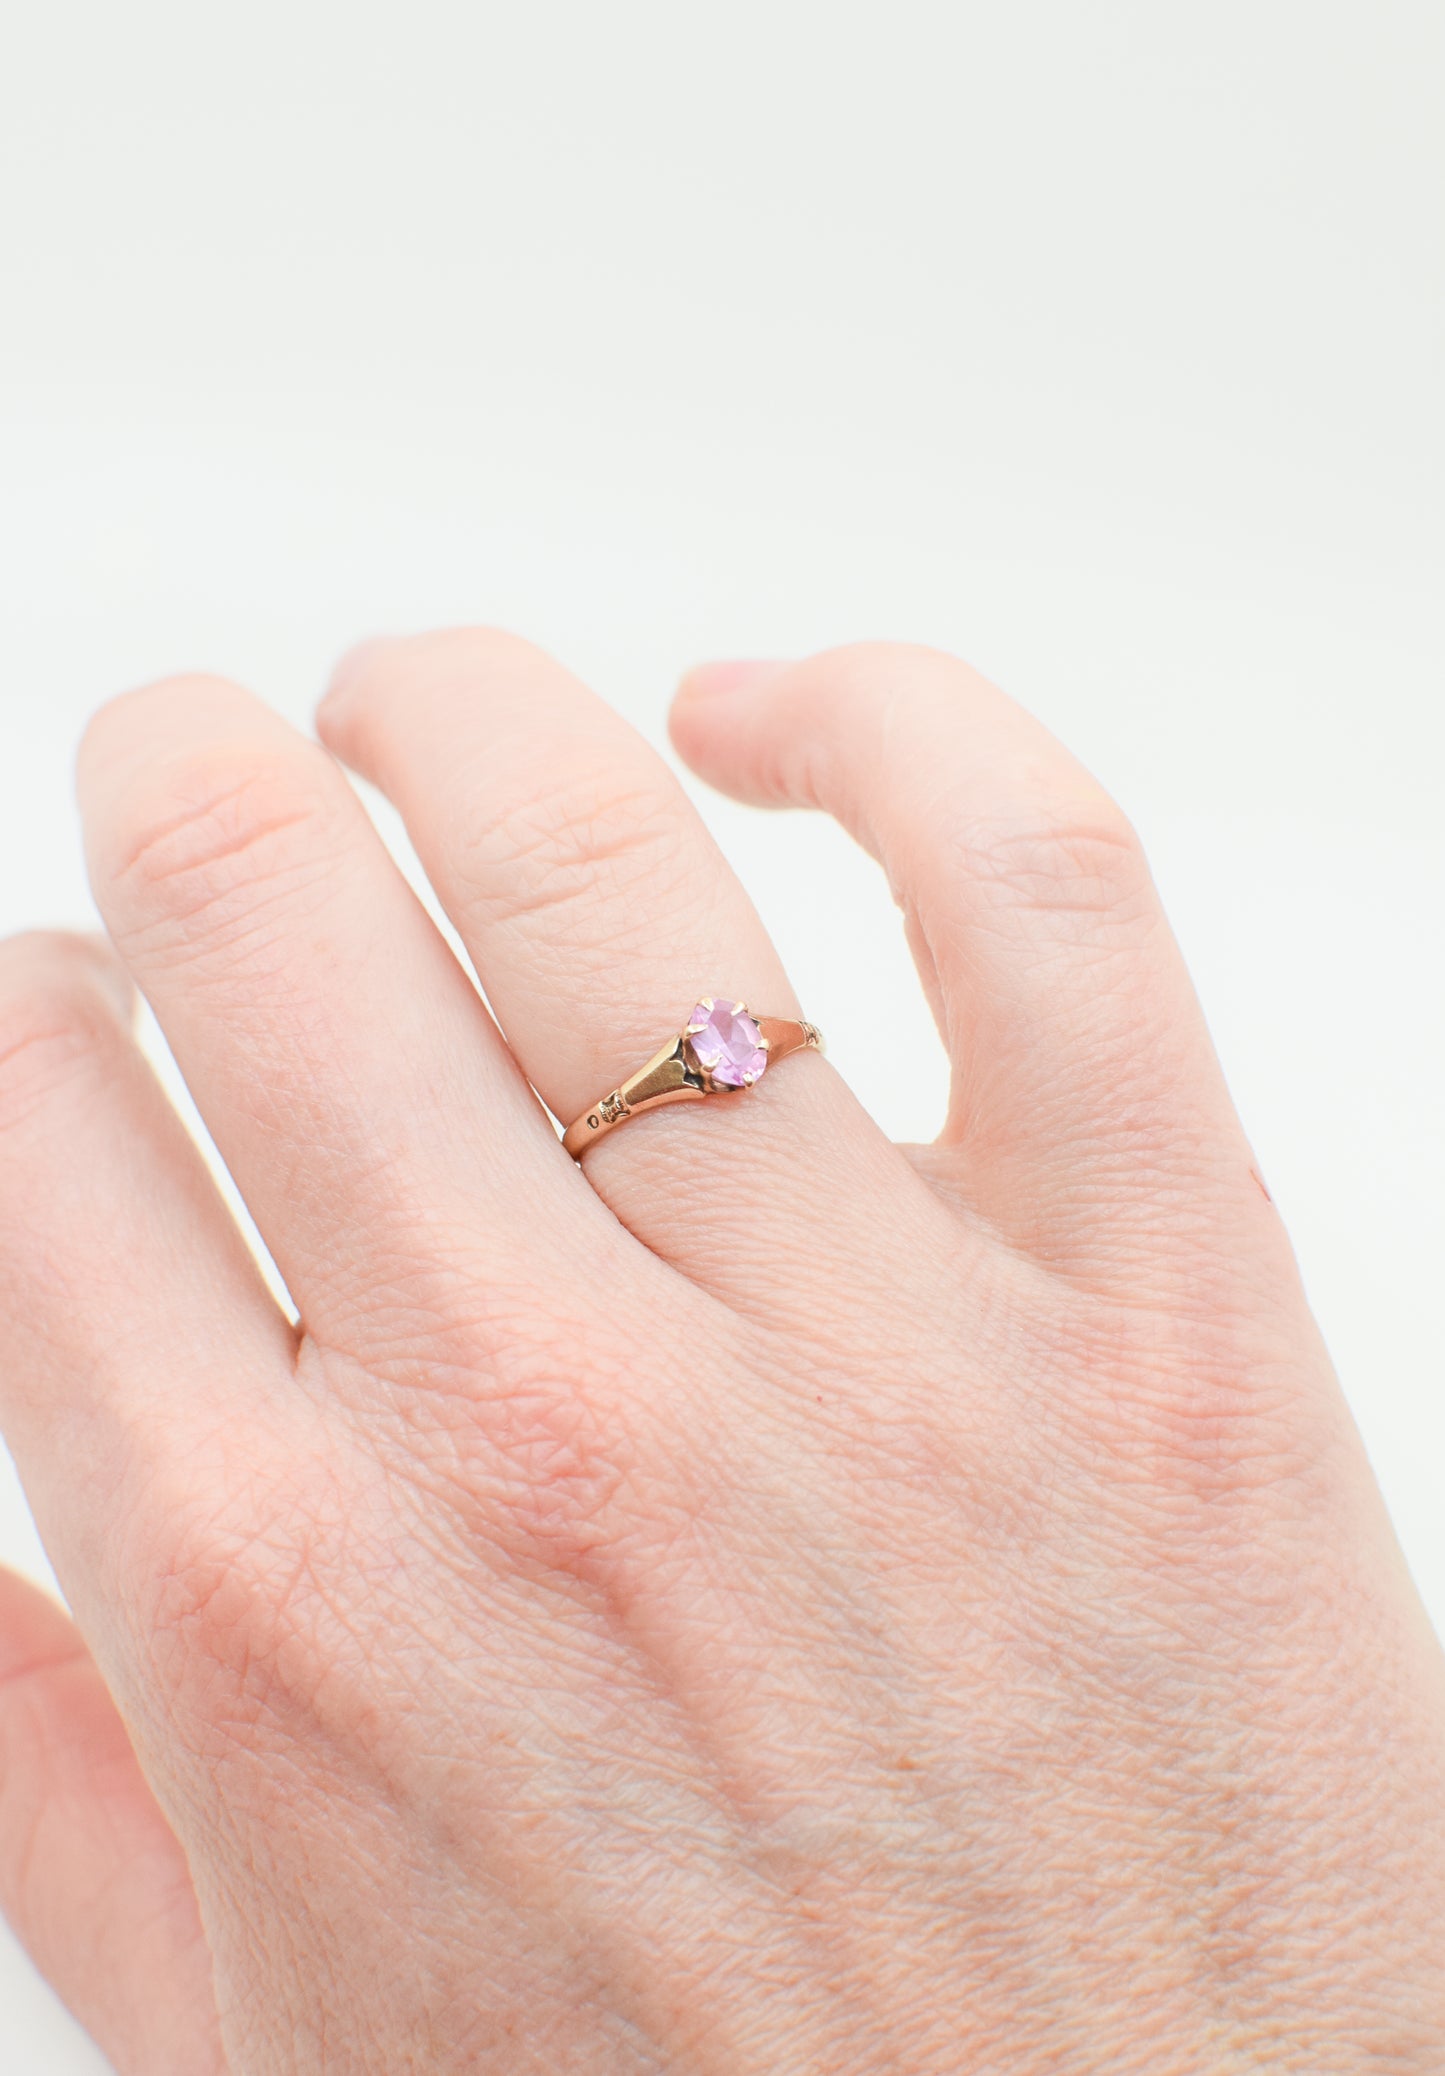 Antique Petite 10kt Gold and Pink Tourmaline Ring | sz. 5.75